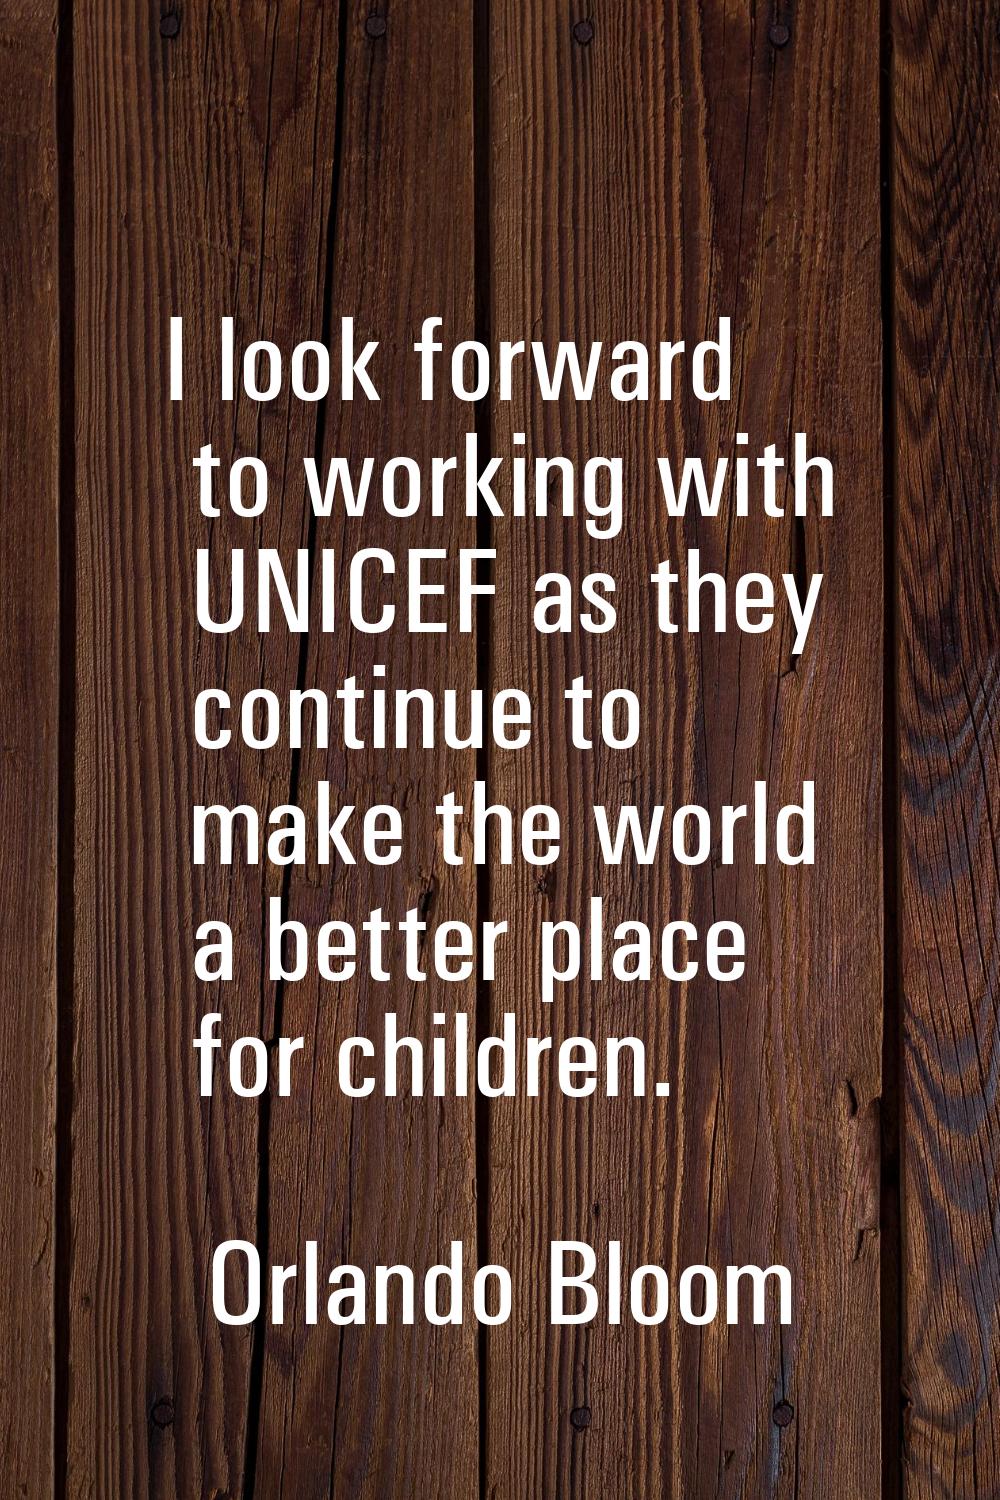 I look forward to working with UNICEF as they continue to make the world a better place for childre